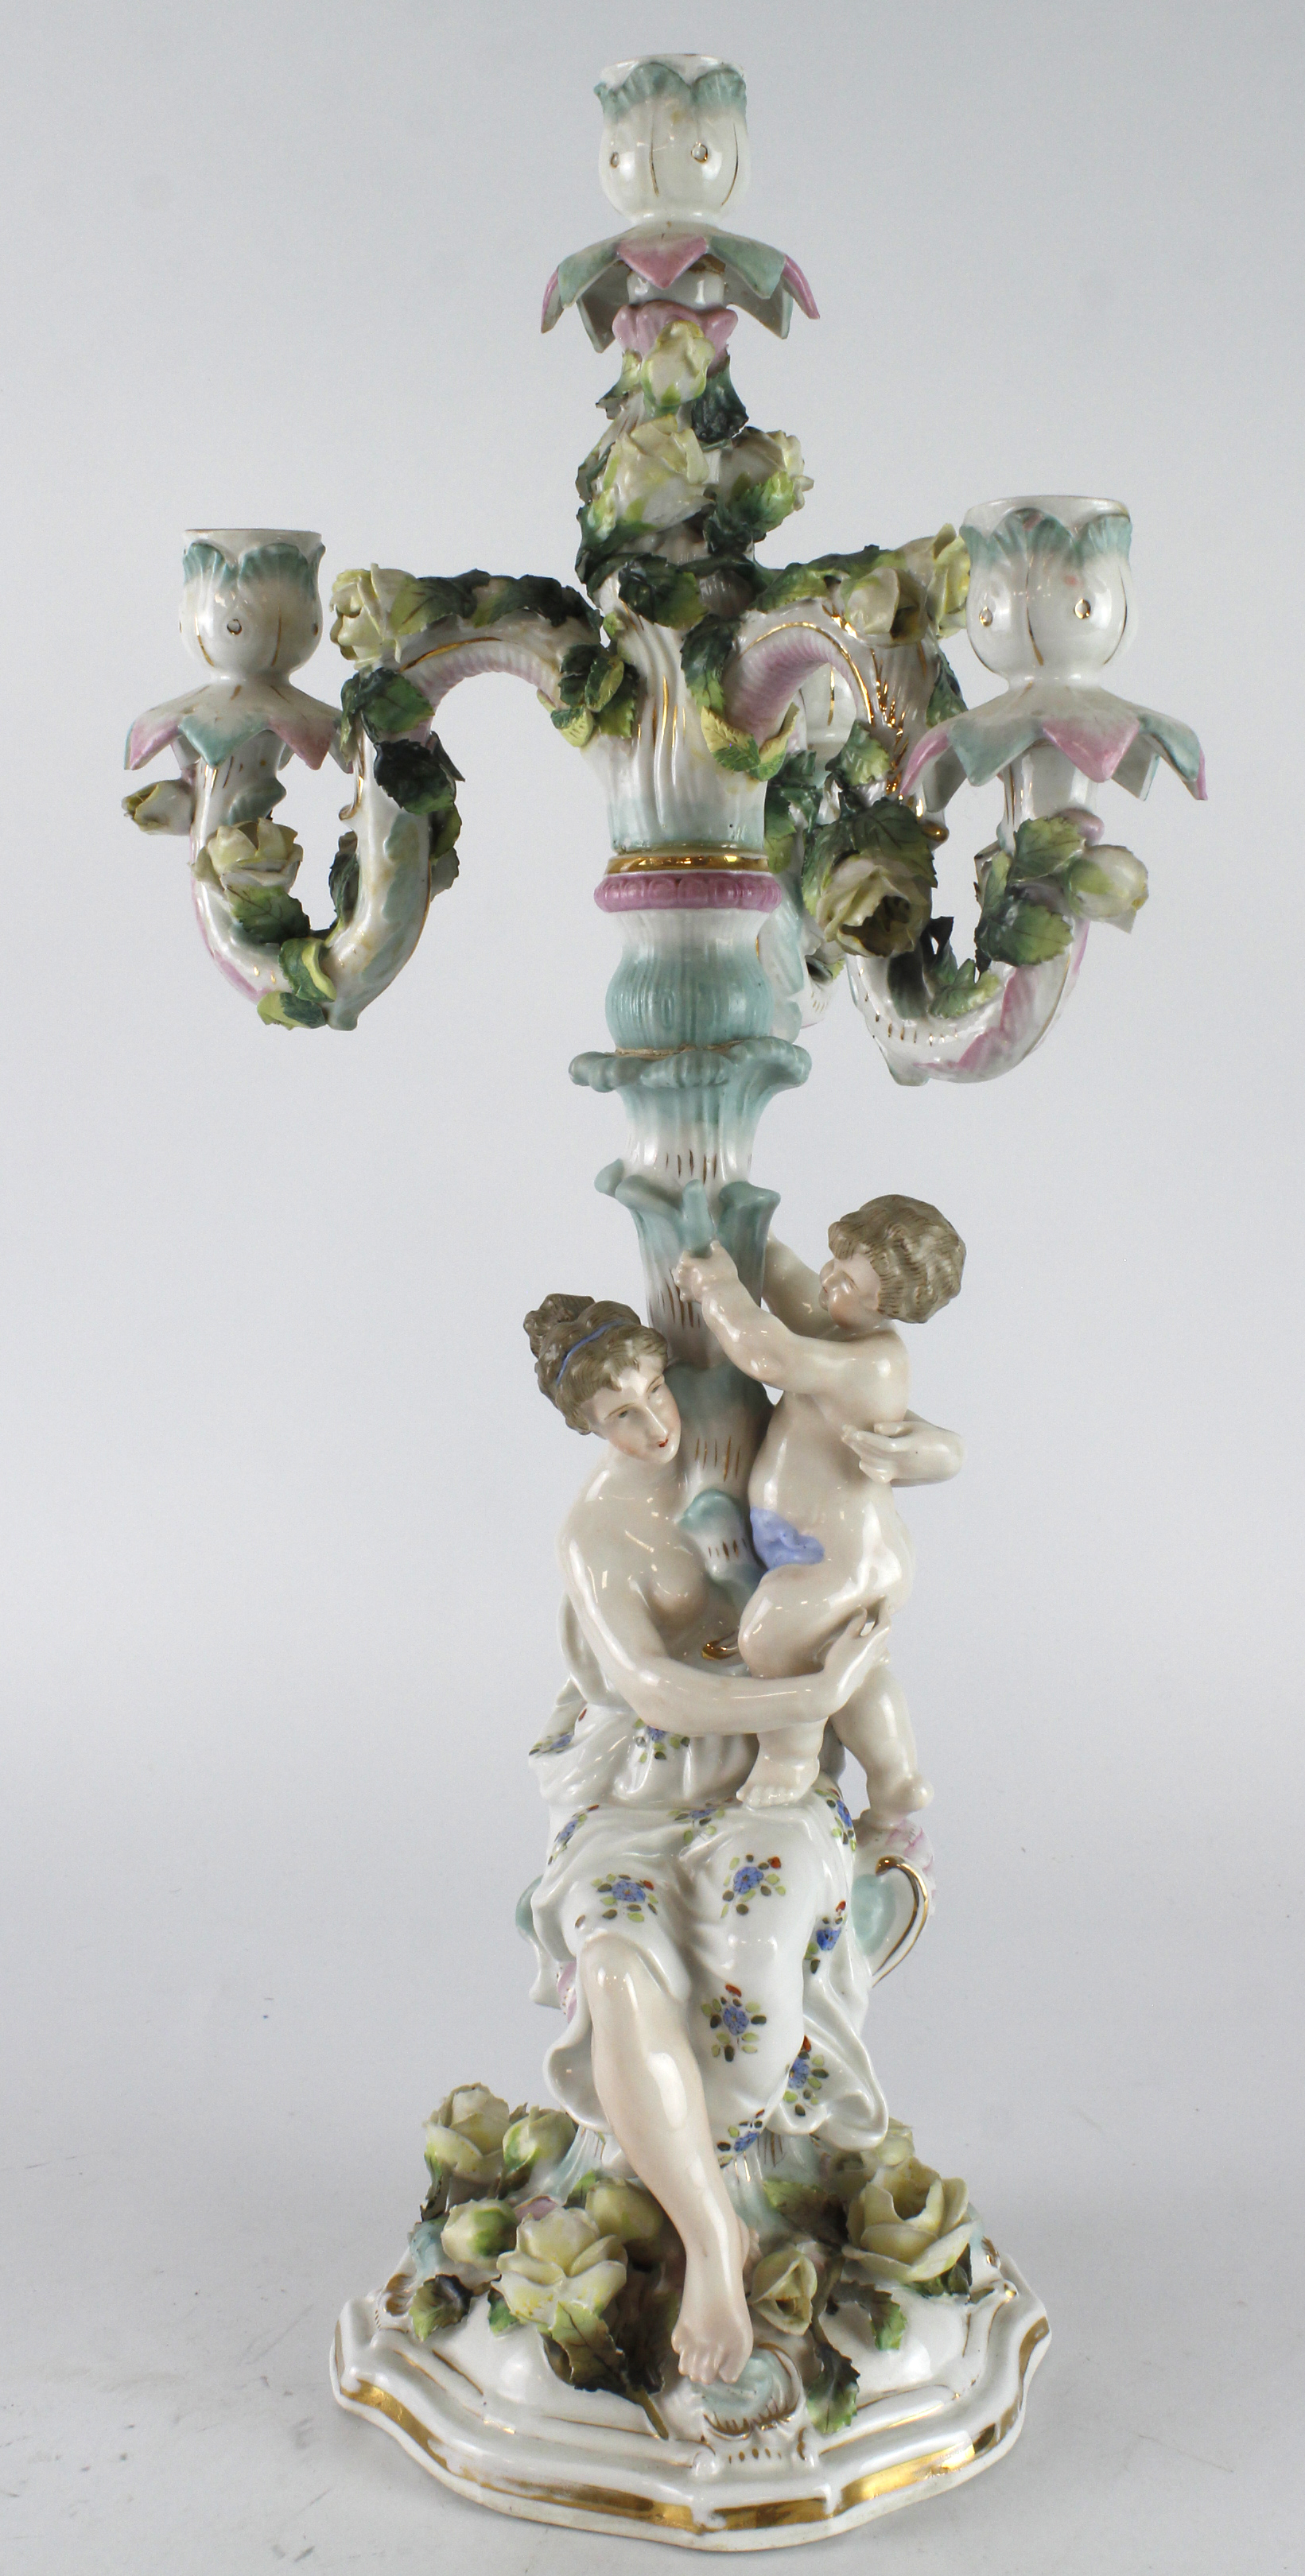 German porcelain candelabra (possibly by Dresden), with three branches, ornately decorated depicting